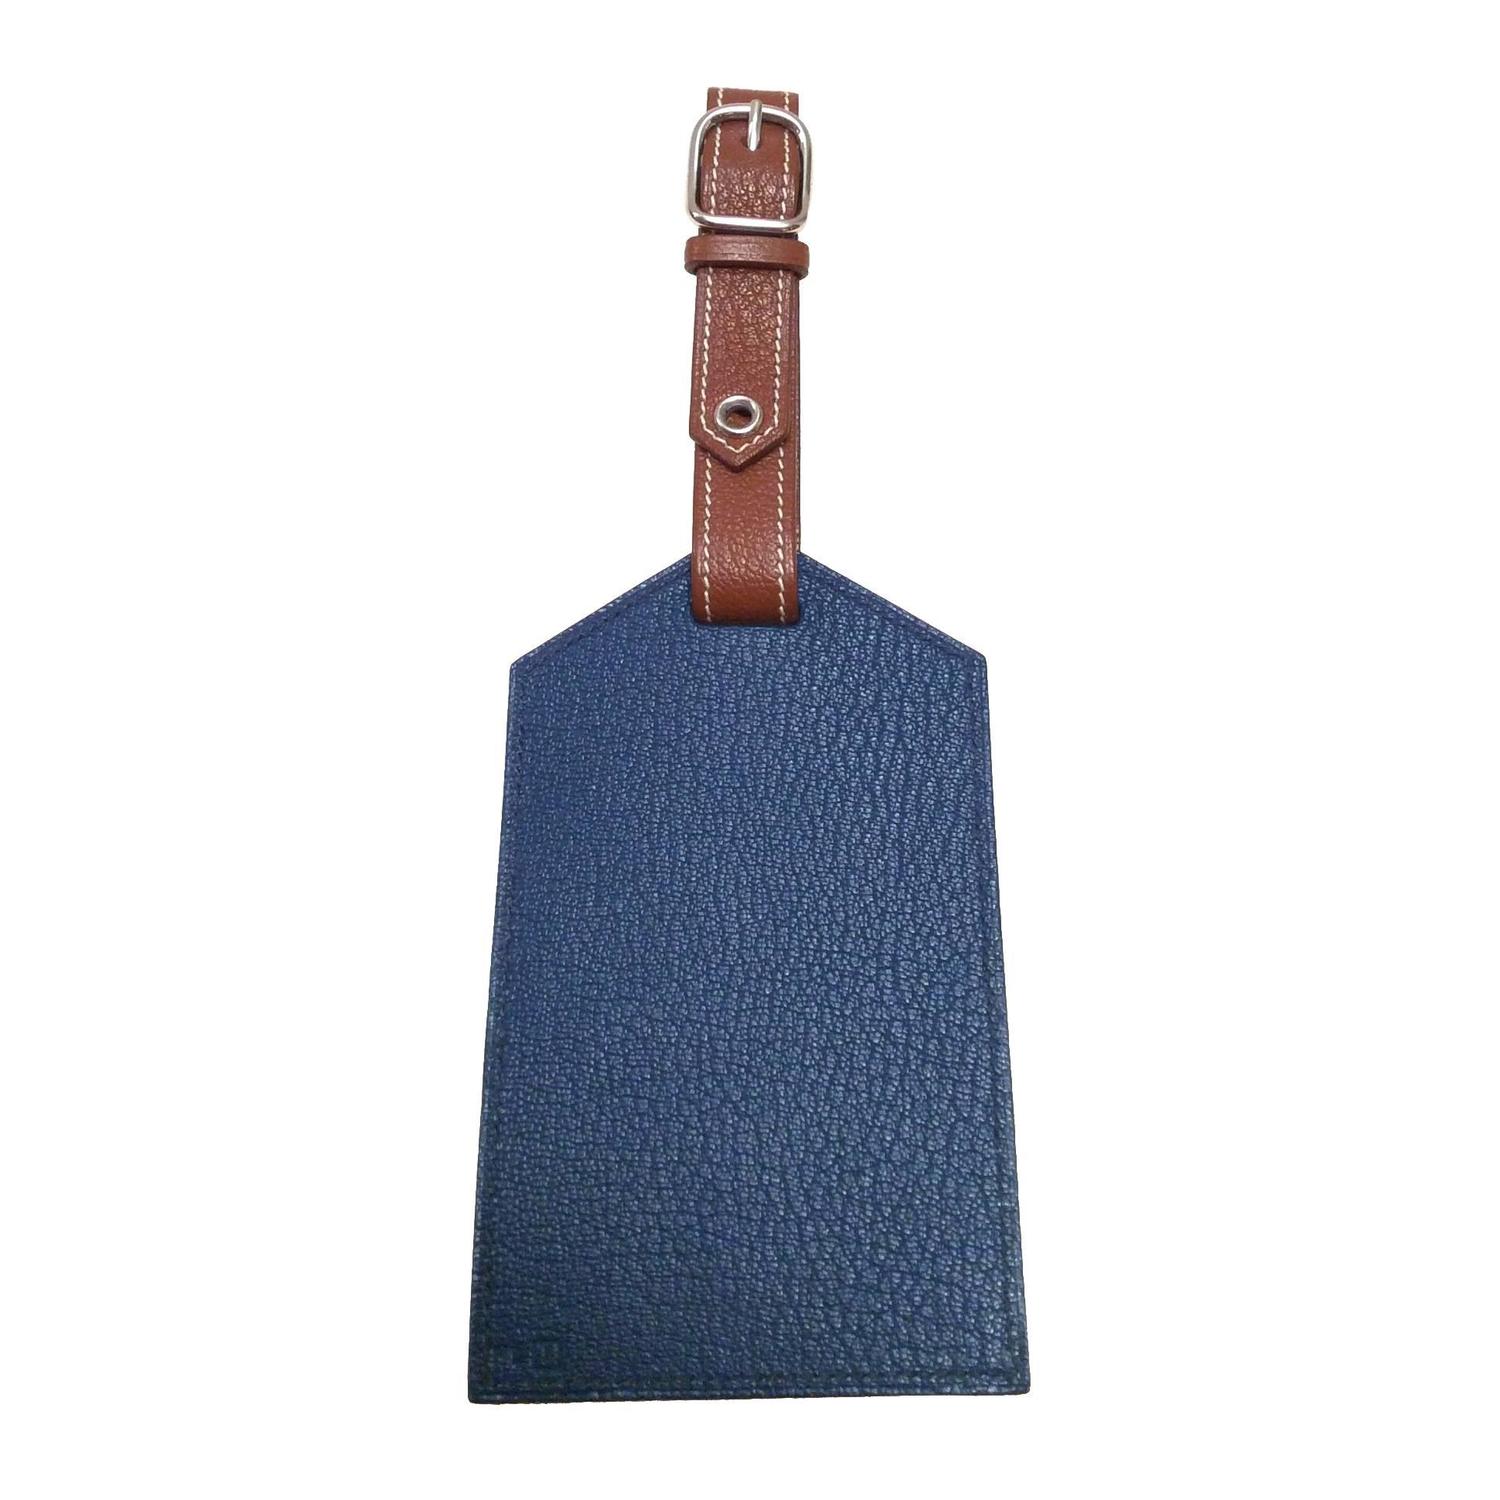 New Hermes Luggage Tag / Bag Charm - Blue and Brown For Sale at ...